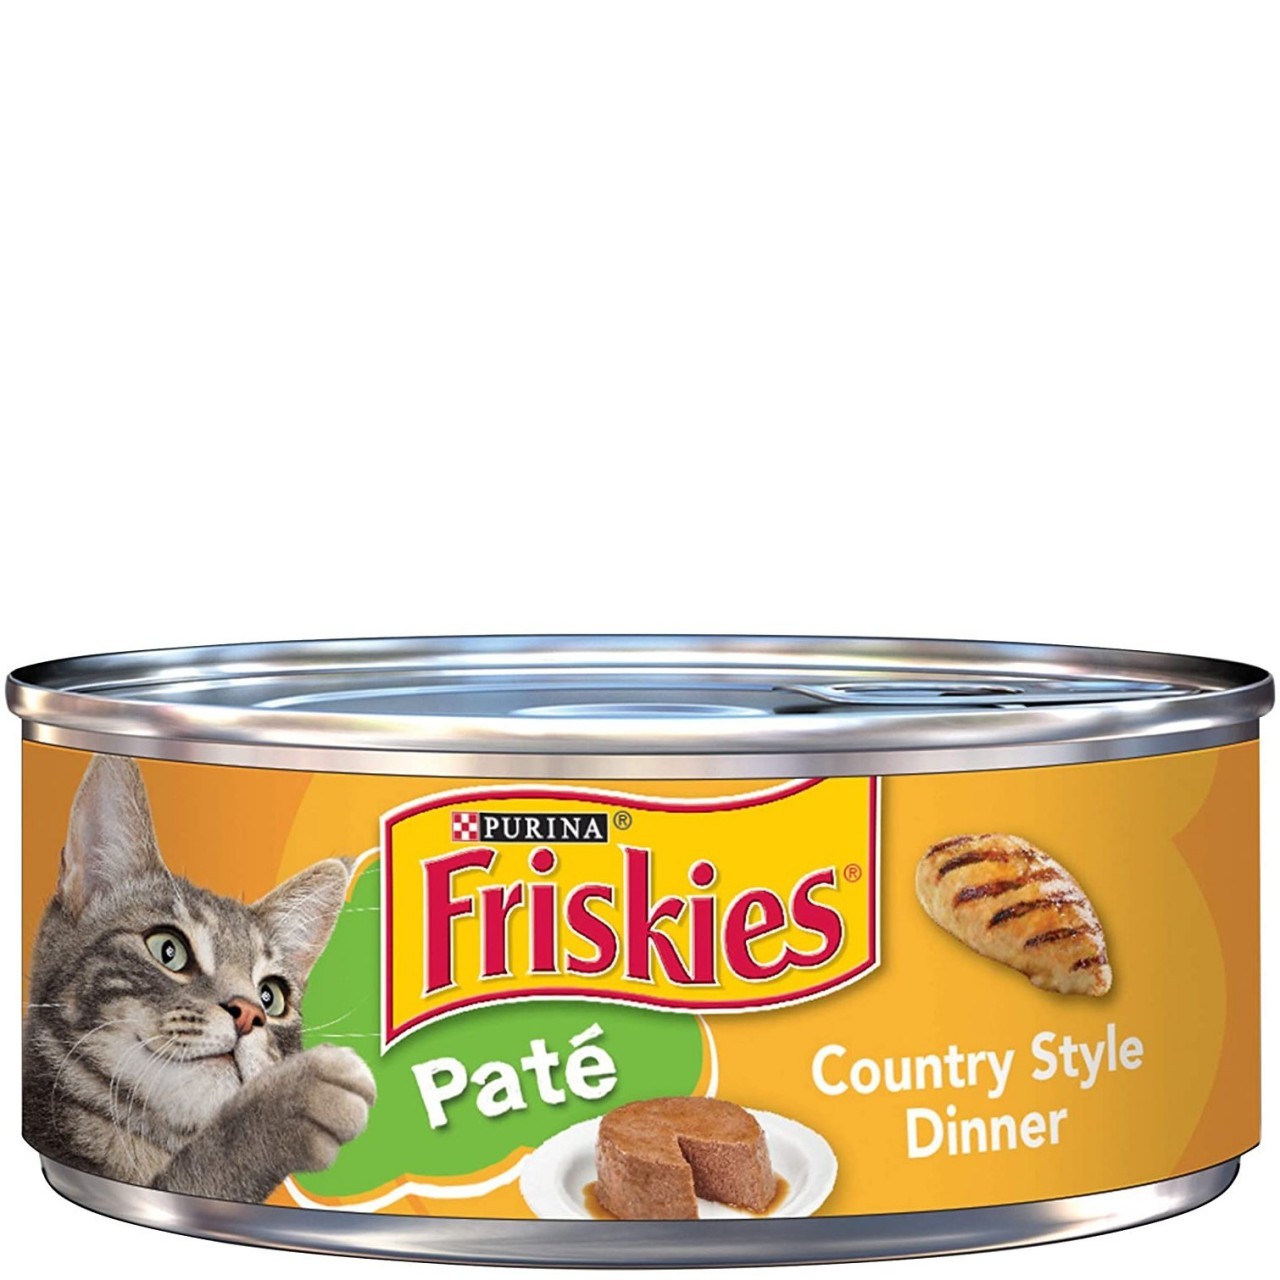 FRISKIES PATE COUNTRY STYLE DINNER 156g